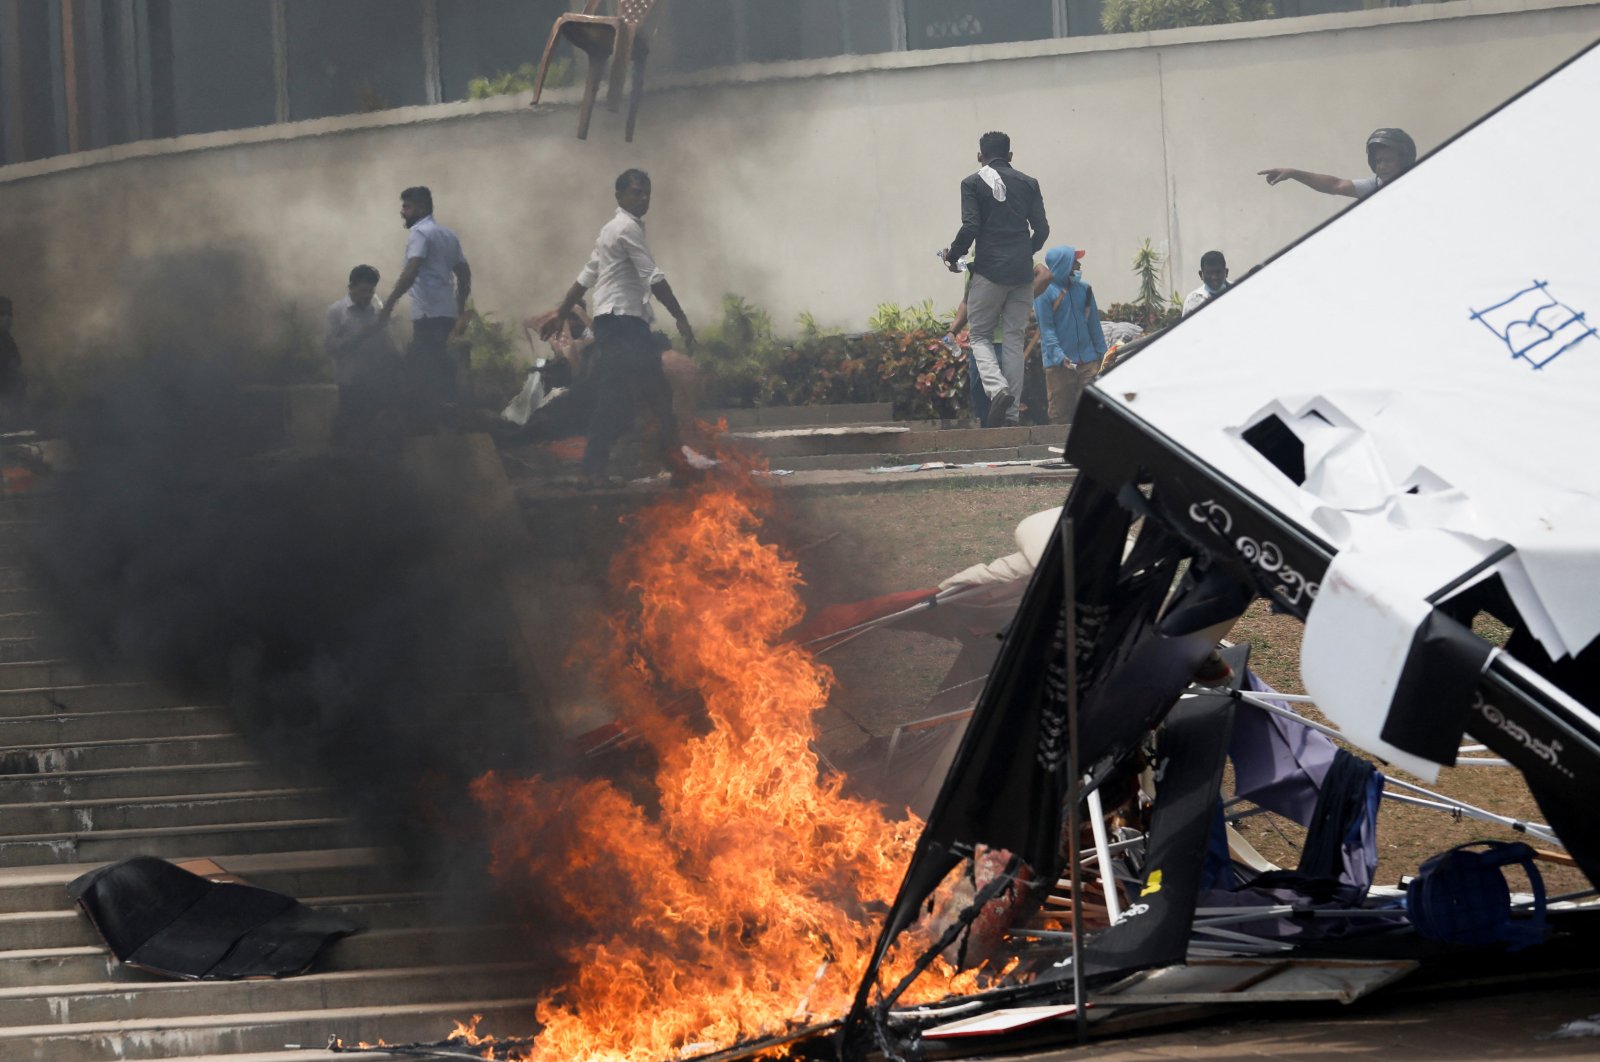 Supporters of Sri Lanka&#039;s ruling party set fire to the &quot;Gotagohome&quot; village, which was set up by anti-government demonstrators, during a clash between the two groups, amid the country&#039;s economic crisis, Colombo, Sri Lanka, May 9, 2022. (Reuters Photo)